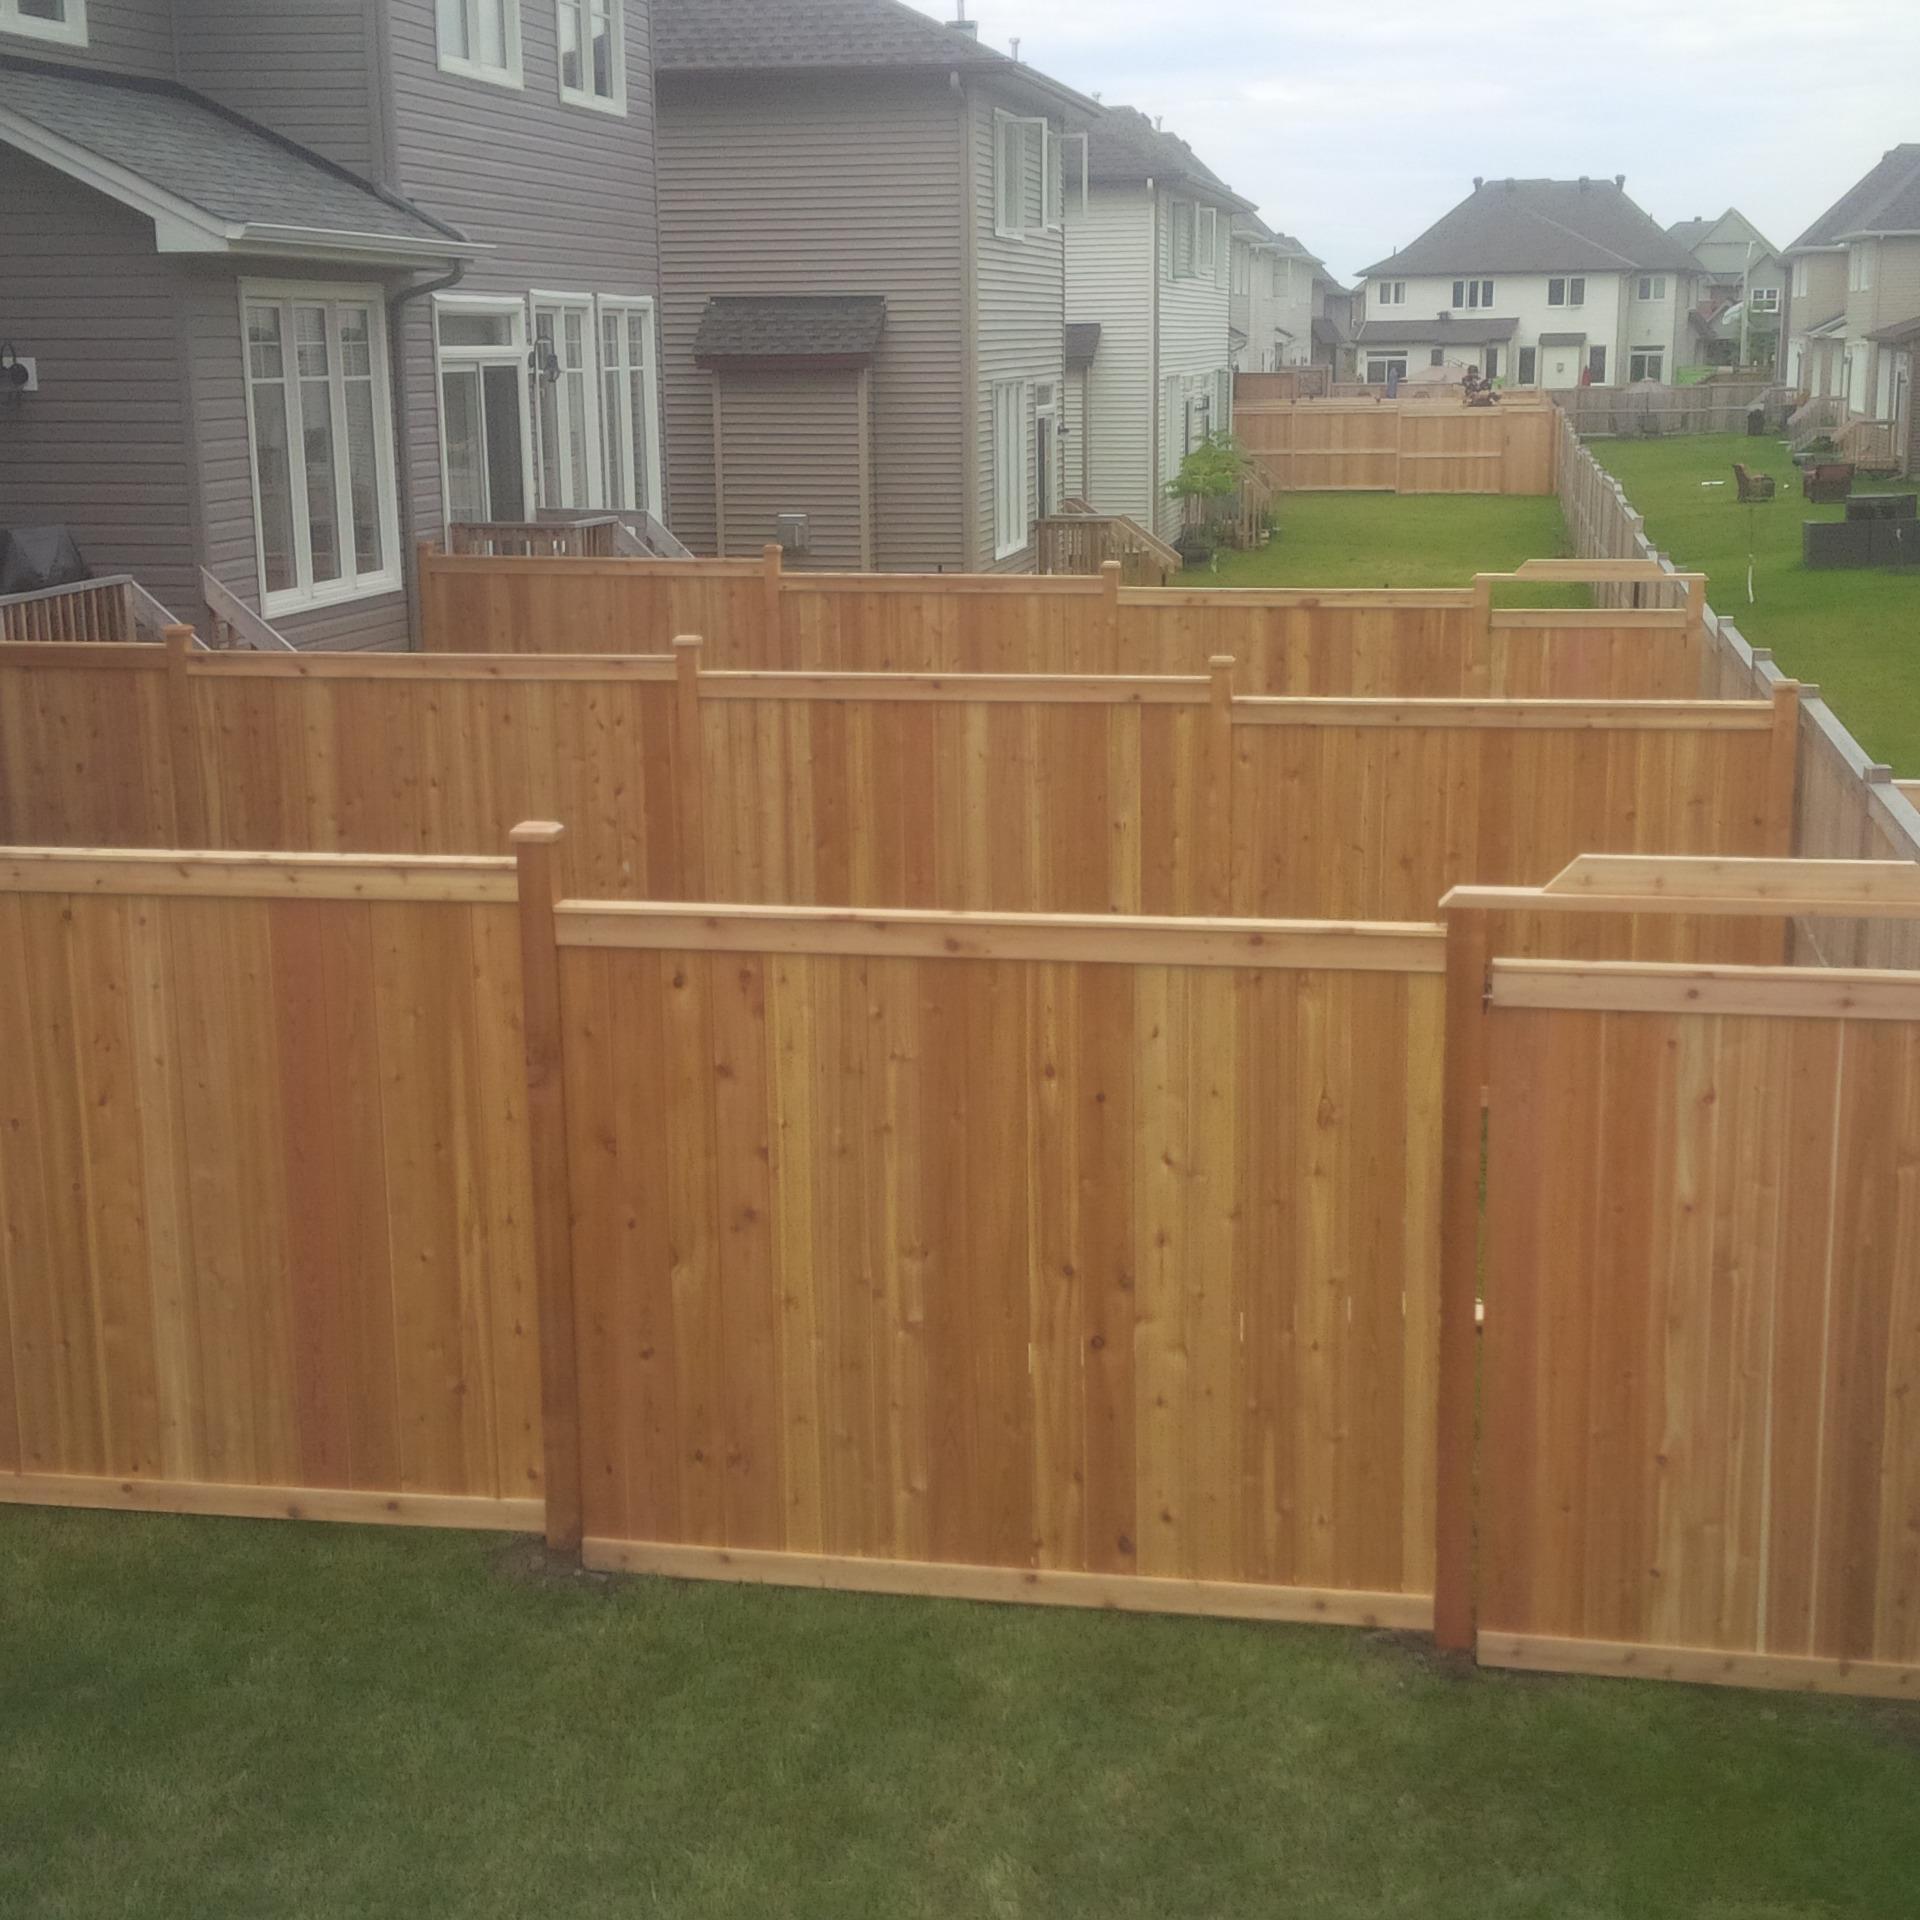 ESM Fences & Decks is a professional deck and fence company located in Ottawa, Ontario. We specialize in all kinds of material ranging from chain link to PVC.